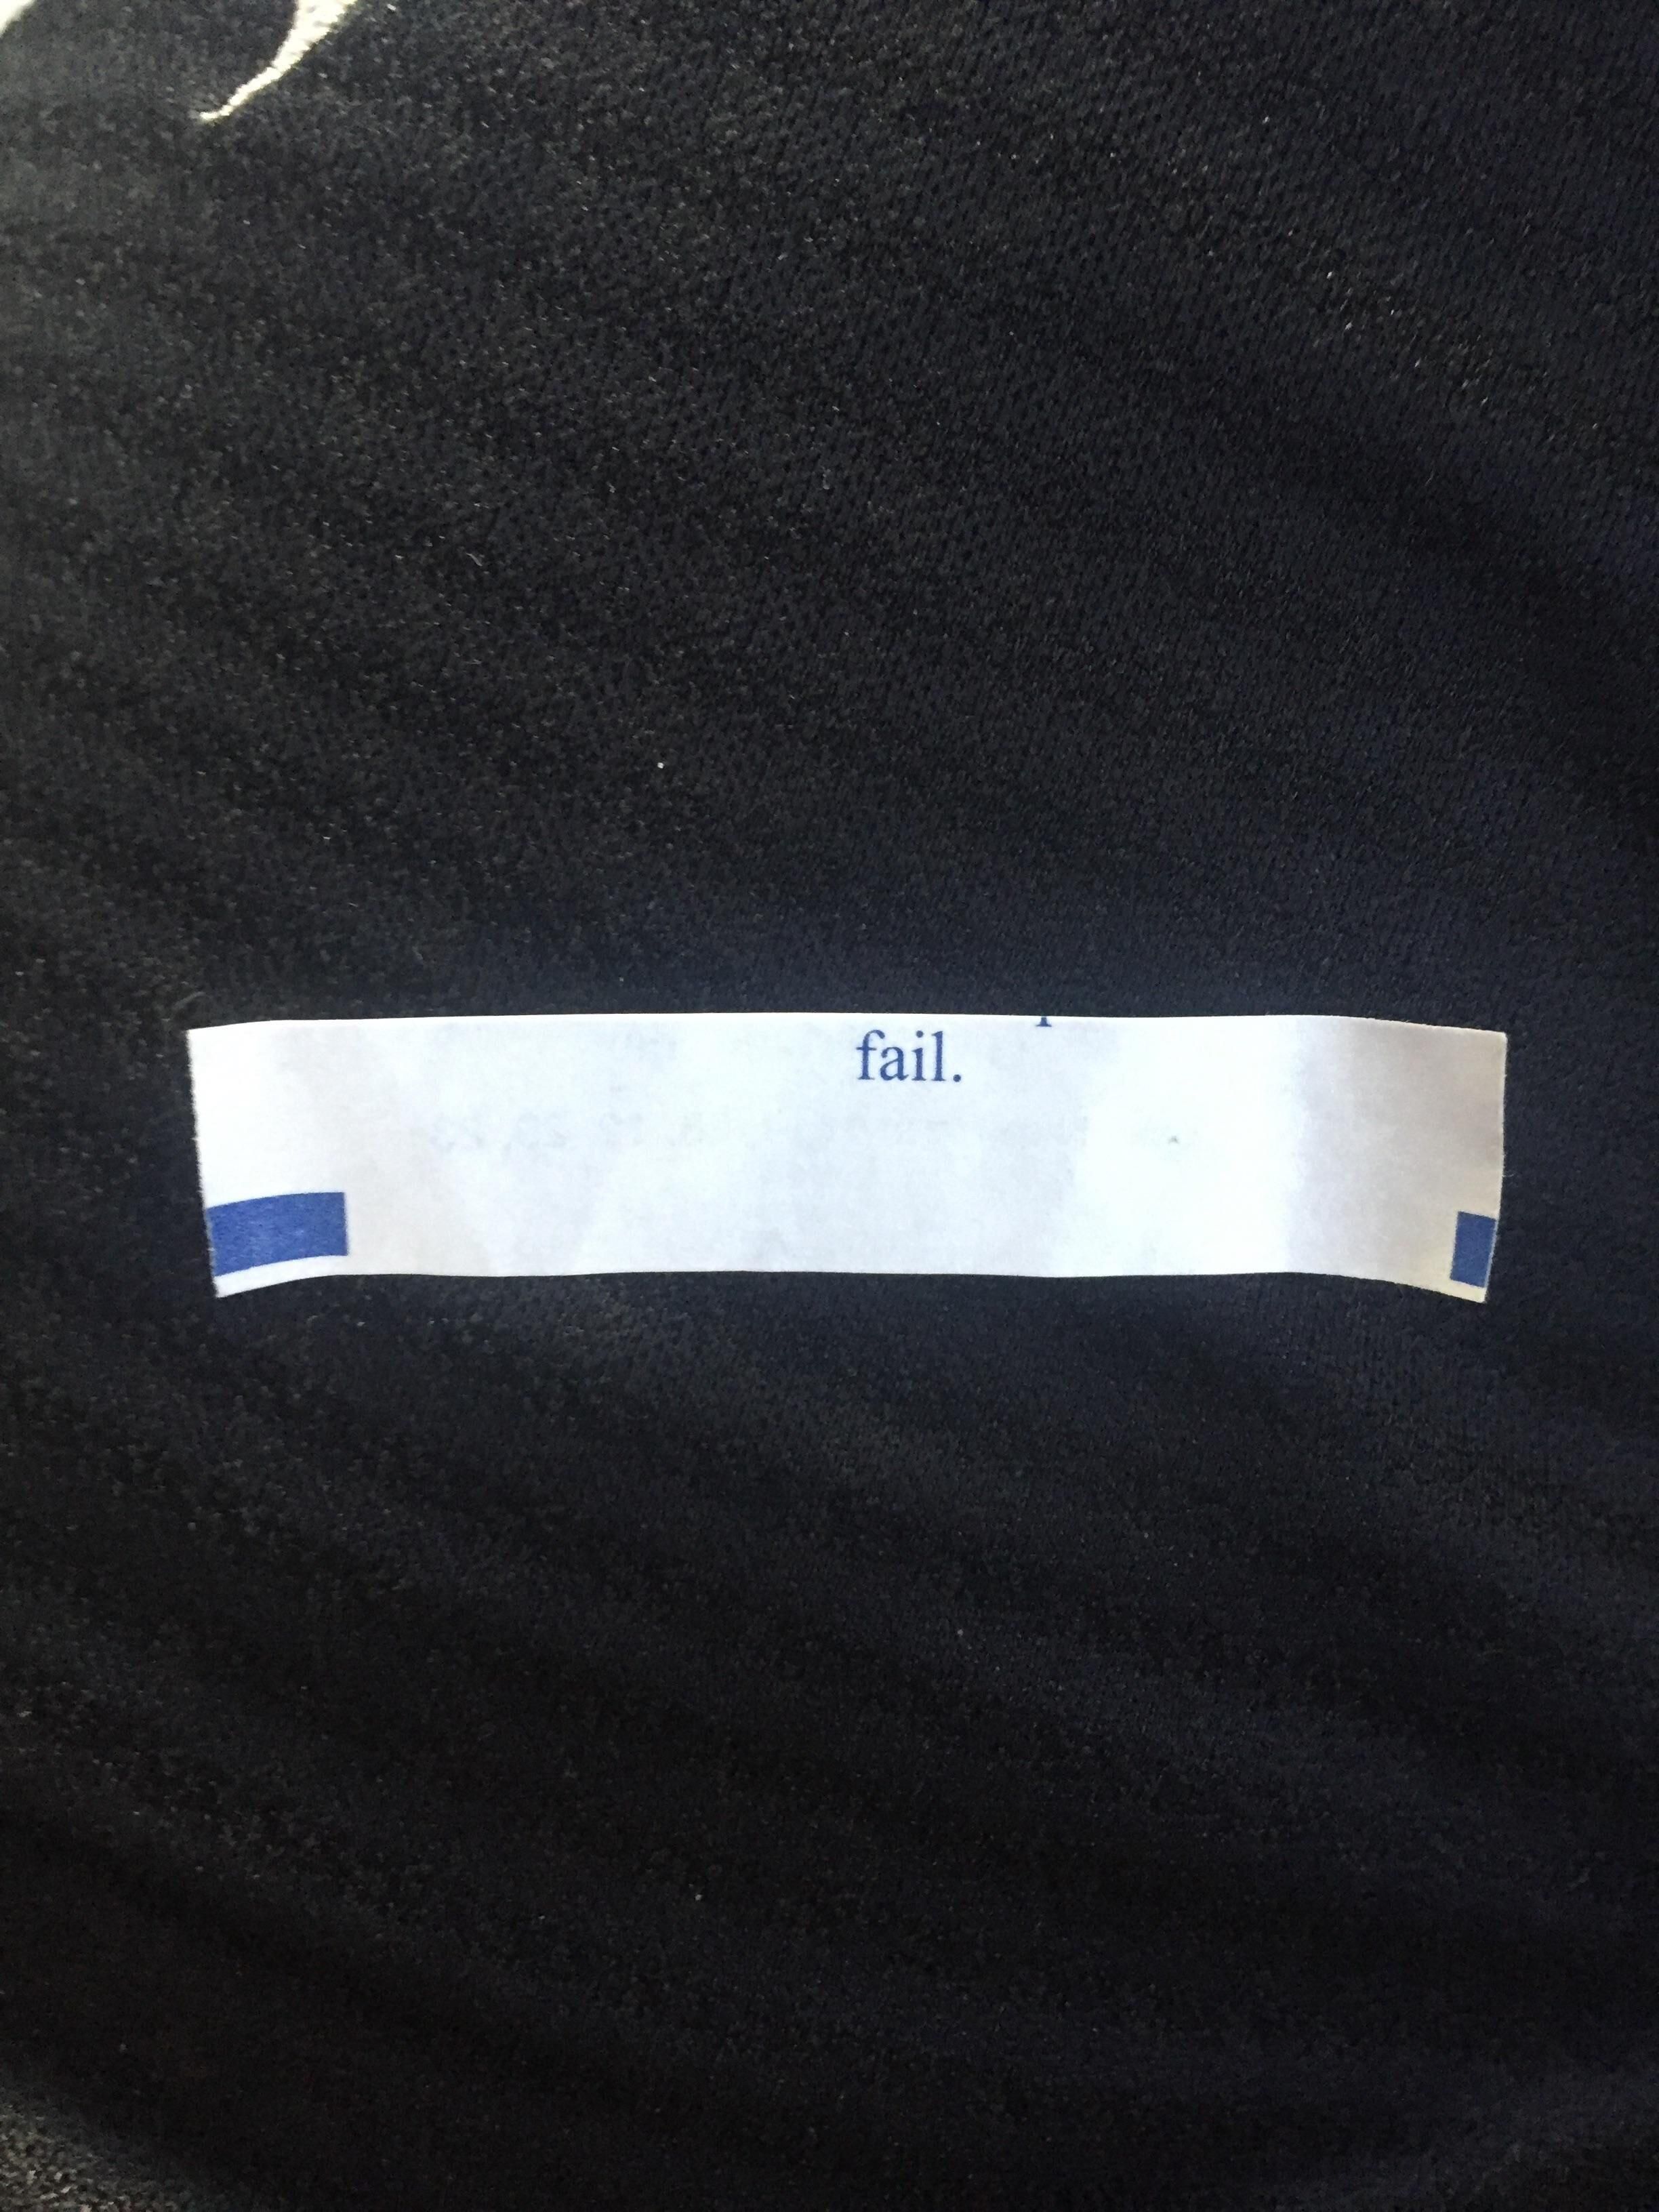 My dads fortune cookie paper has misaligned print